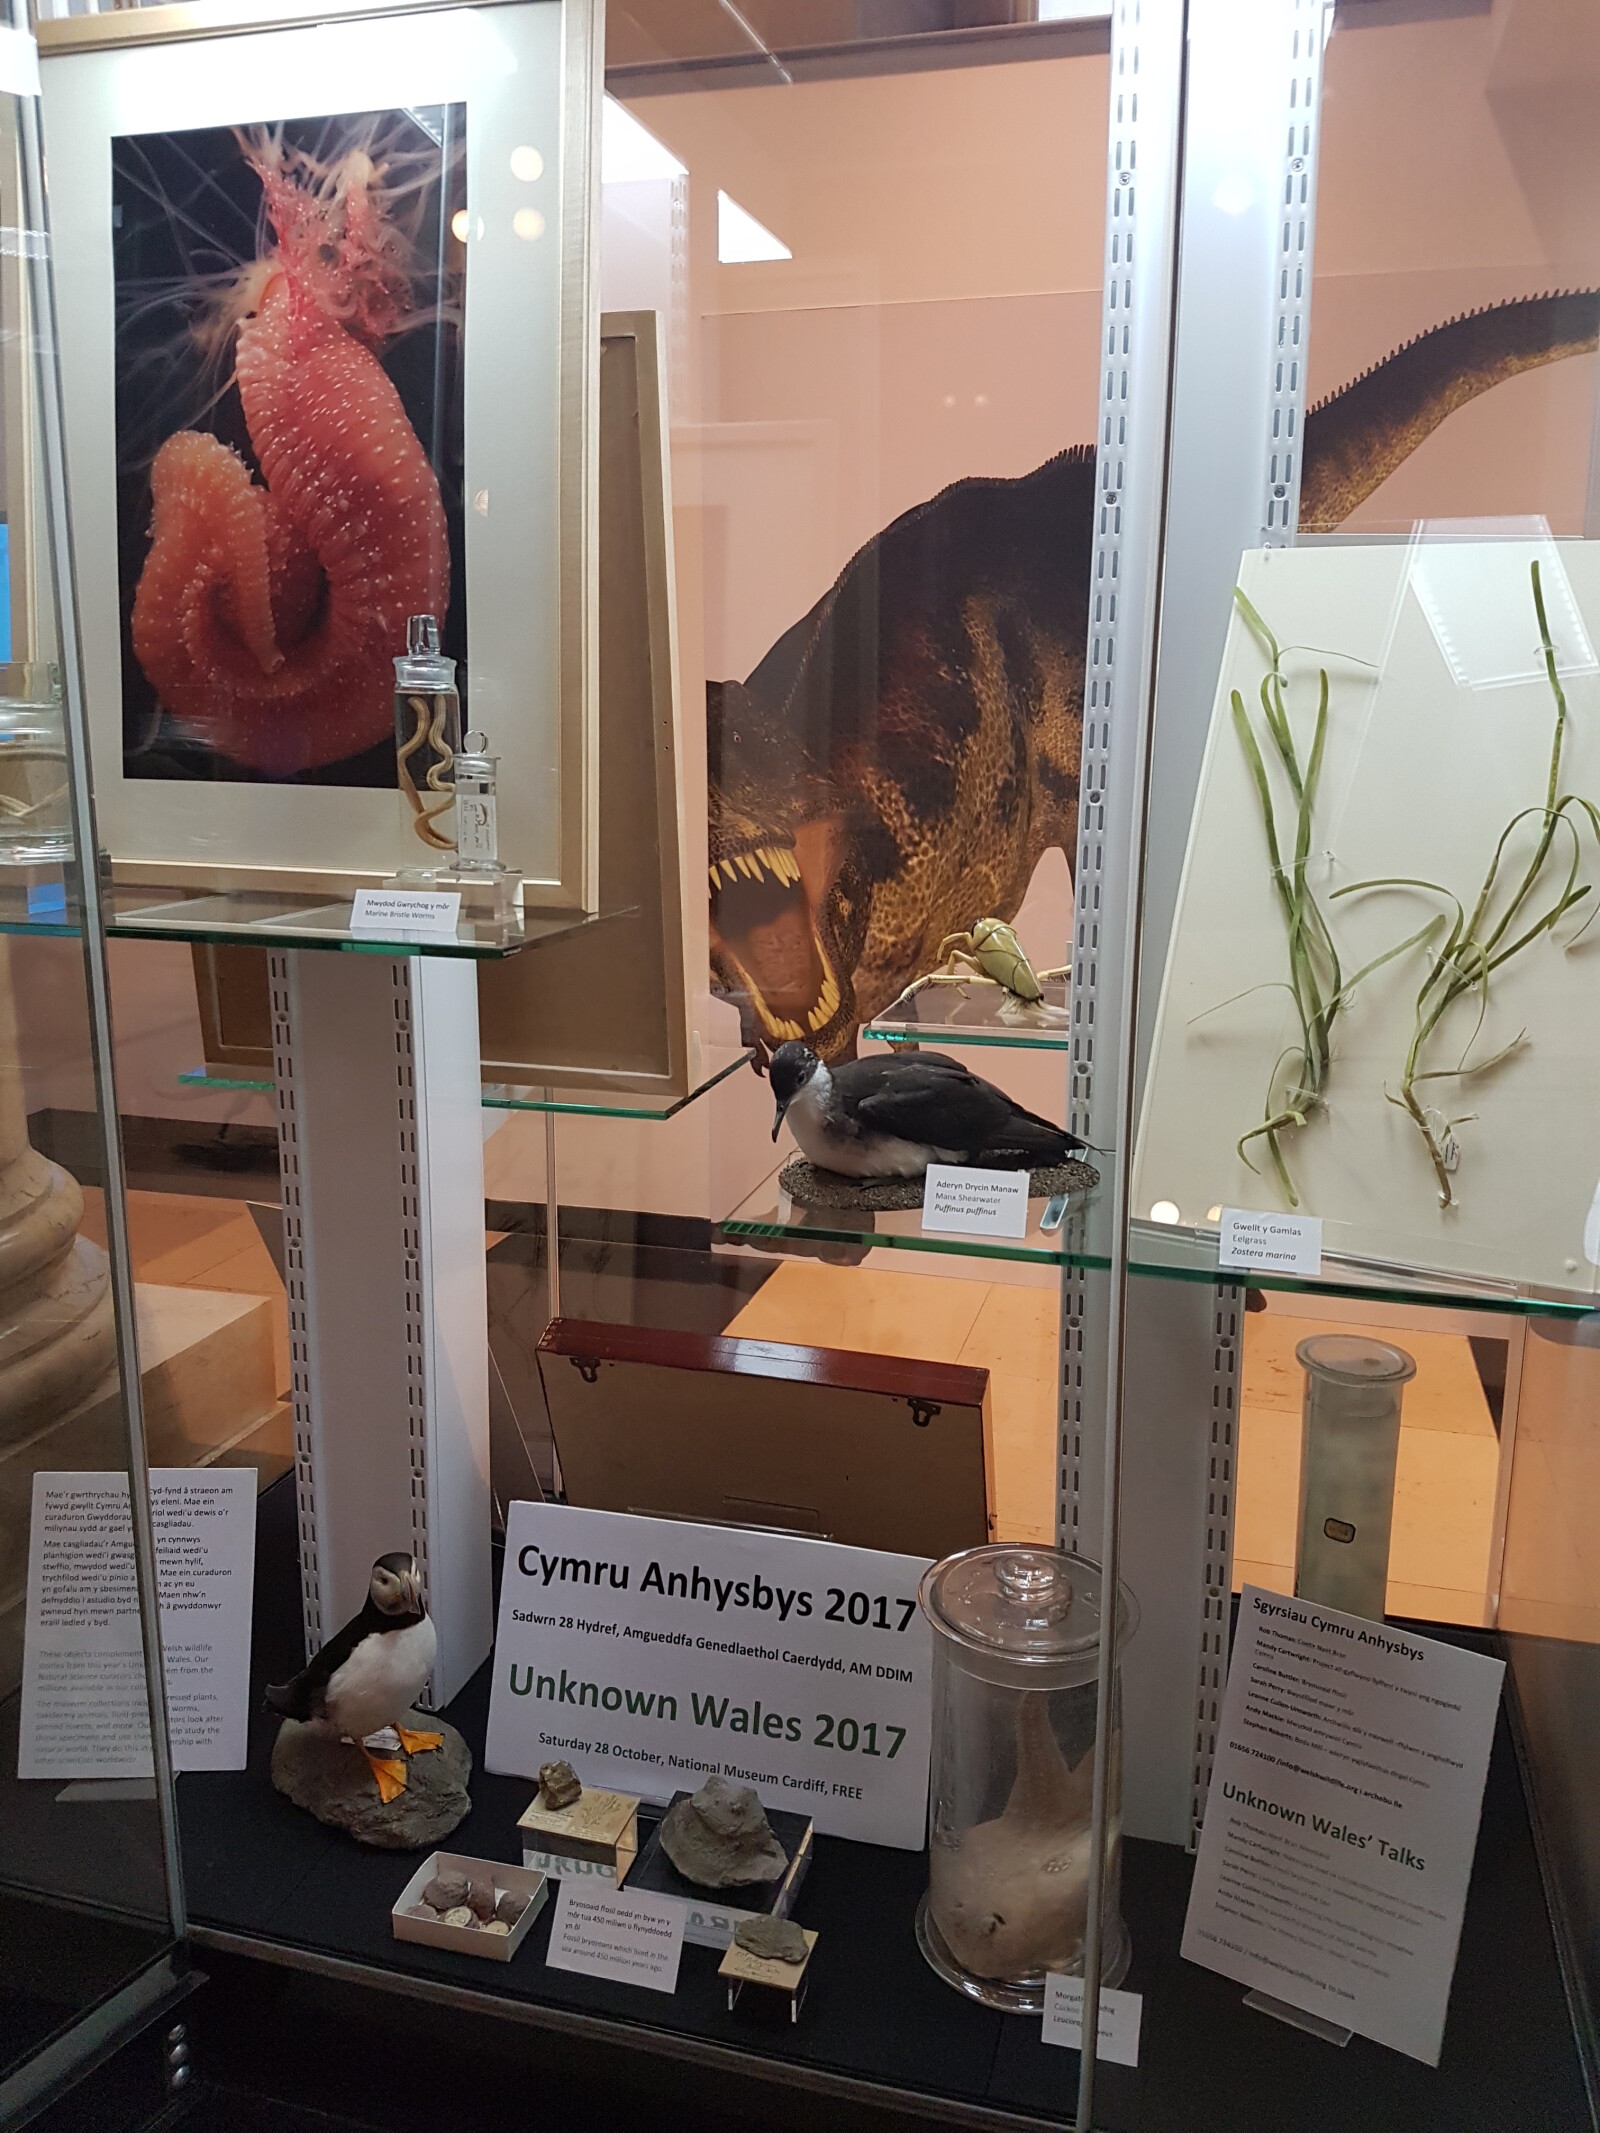 Specimens relating to Unknown Wales 2017 on display at National Museum Cardiff.